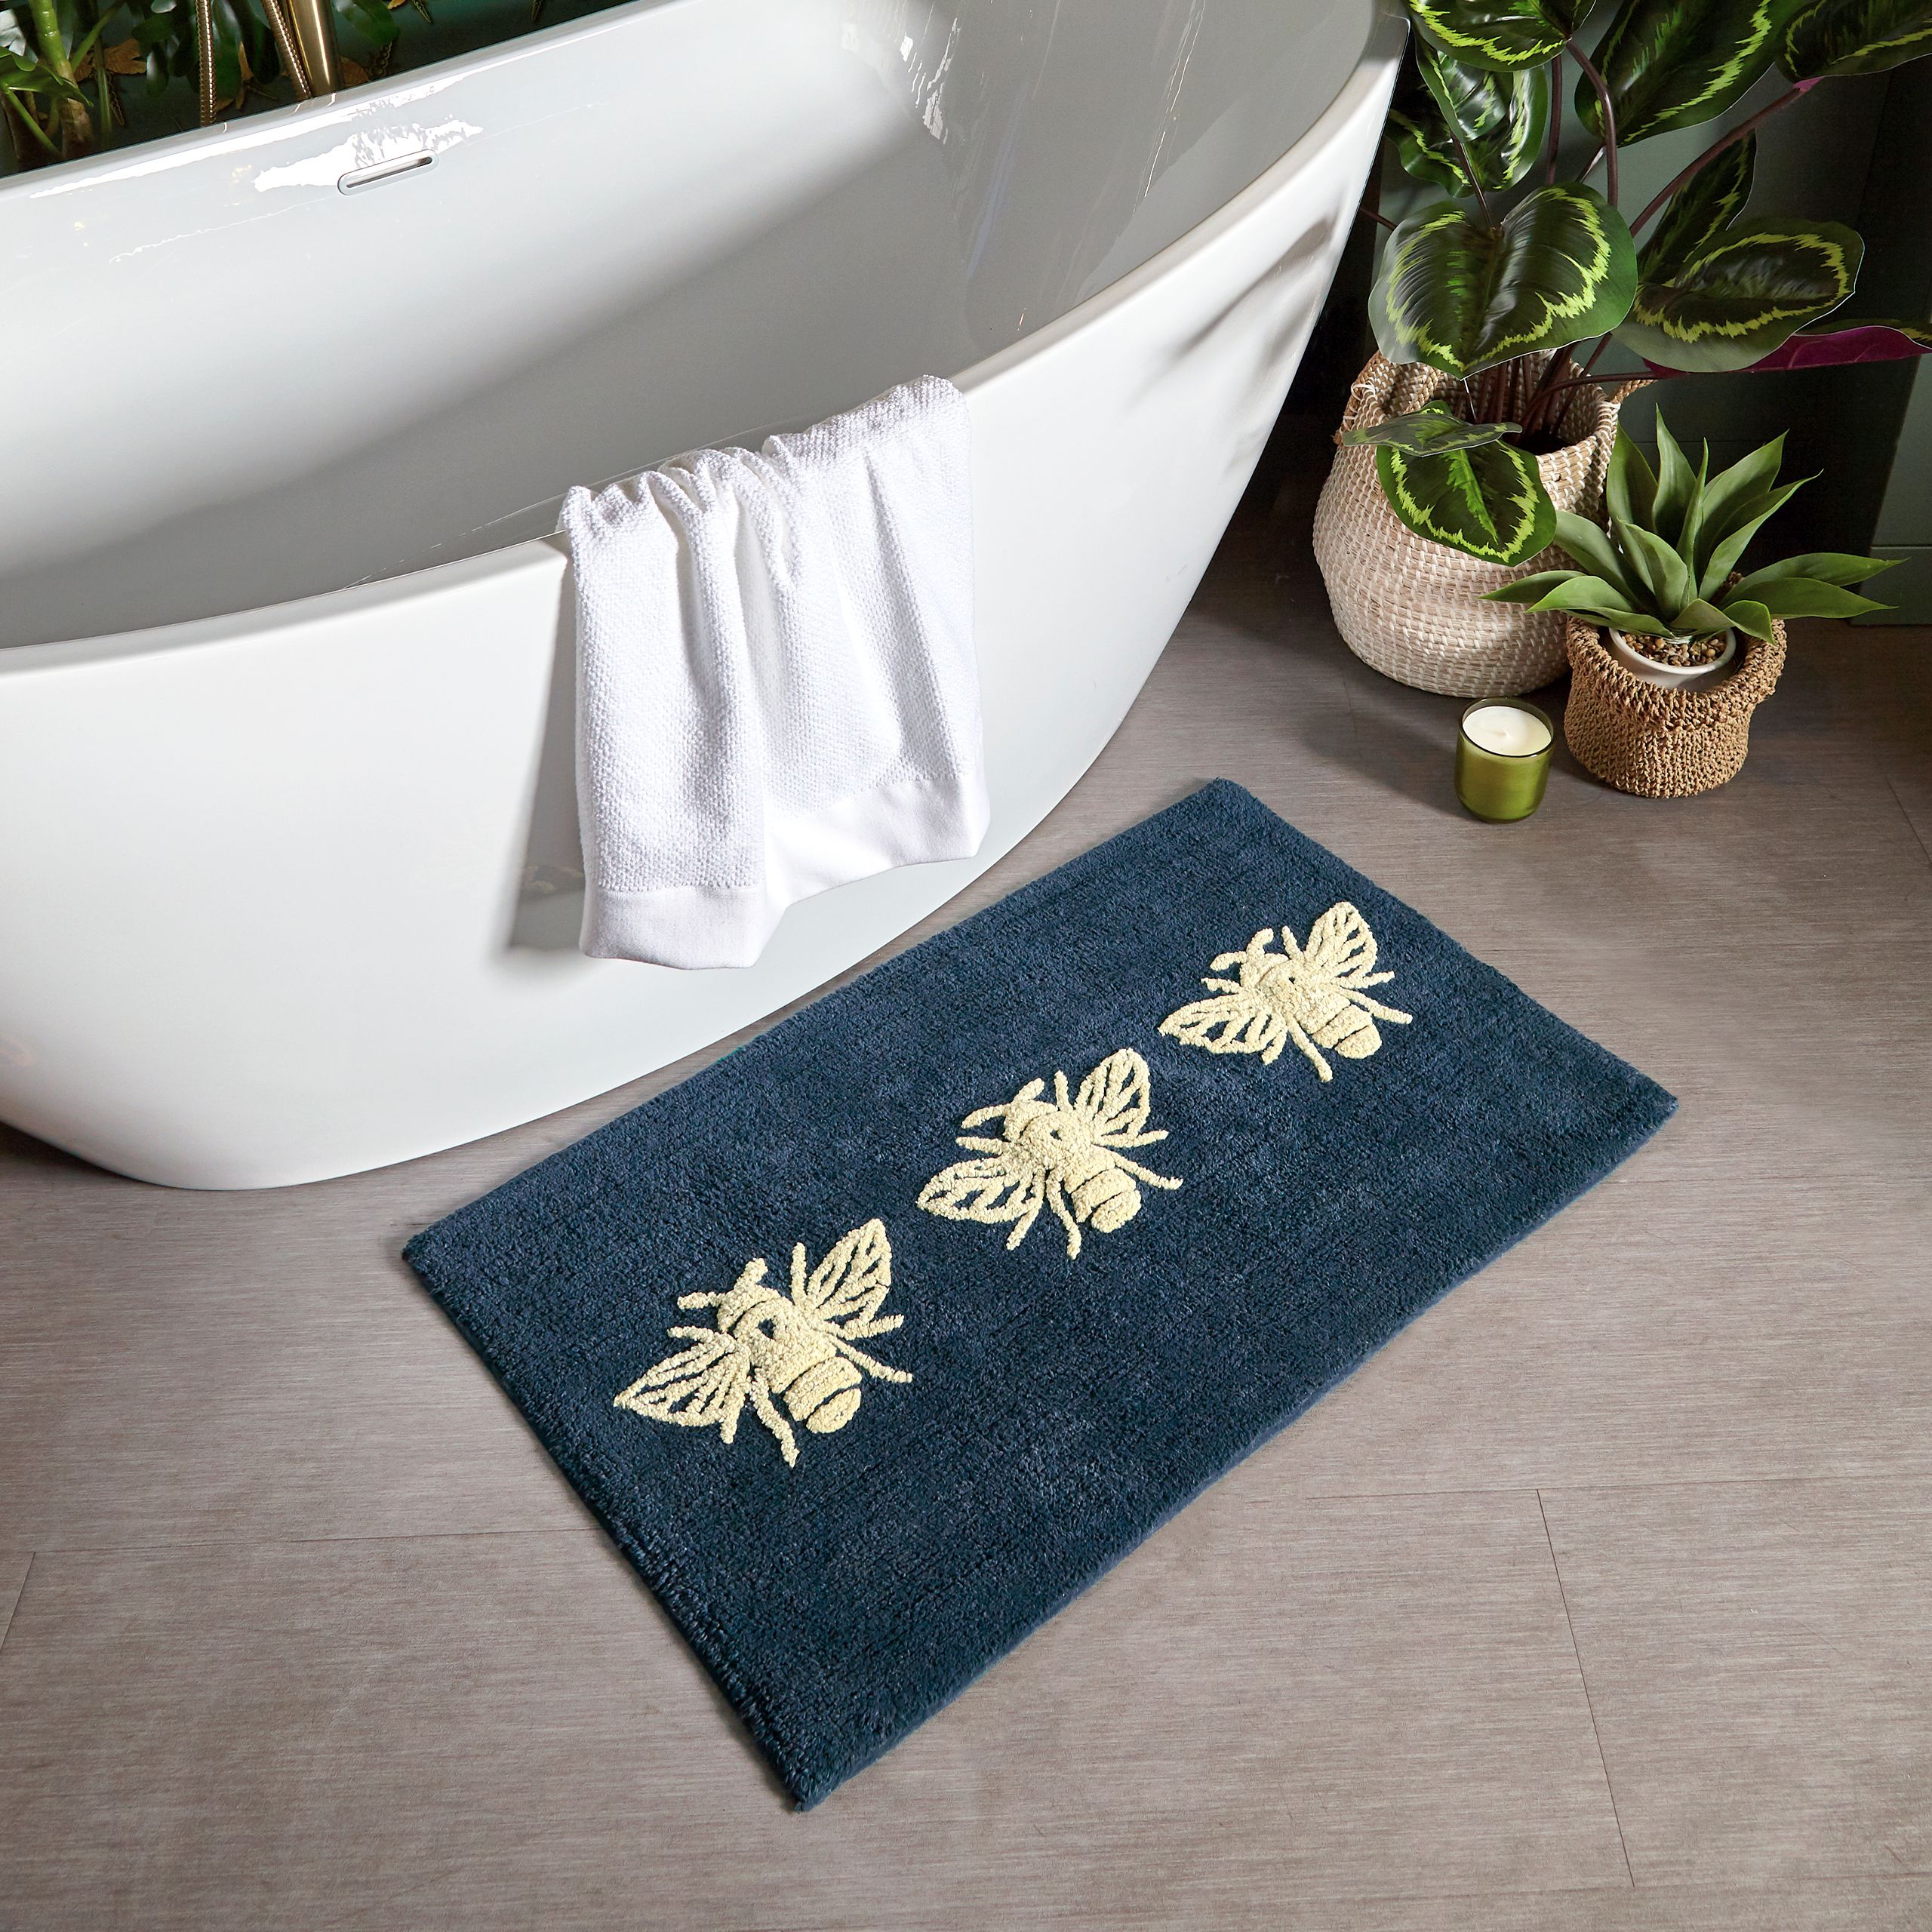 Featuring a tufted Bumblebee design on a navy blue cotton fabric. Made from 100% Cotton, making this bath mat incredibly soft under foot. This bath mat has an anti-slip quality, keeping it securely in place on your bathroom floor. The 1800 GSM ensures this bath mat is super absorbent preventing post-bath or shower puddles.